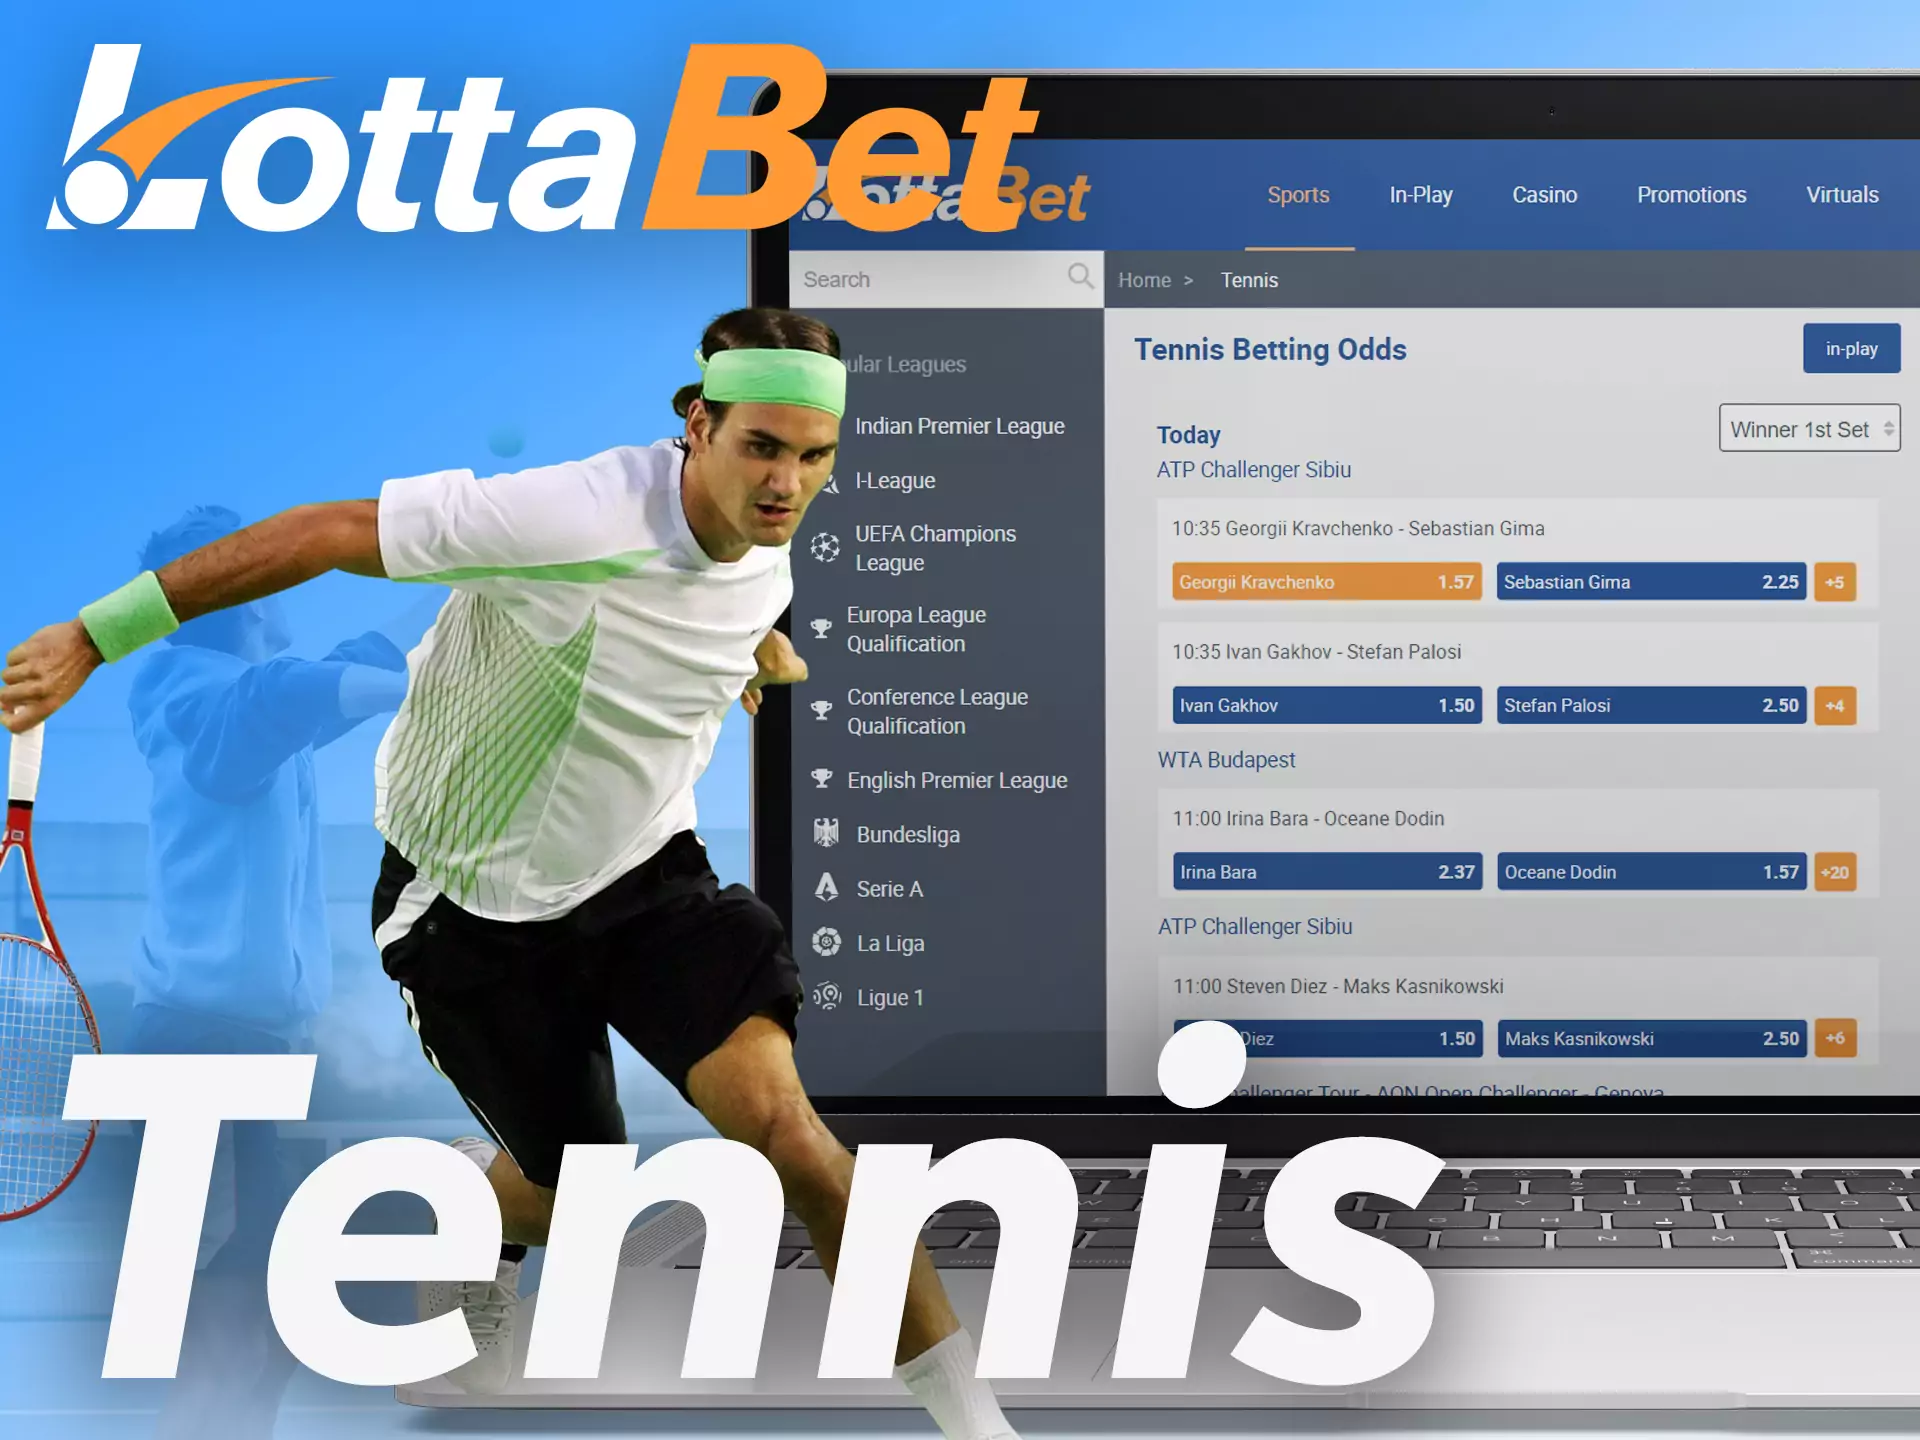 Tennis matches are quite popular for betting among Lottabet users all over the world.